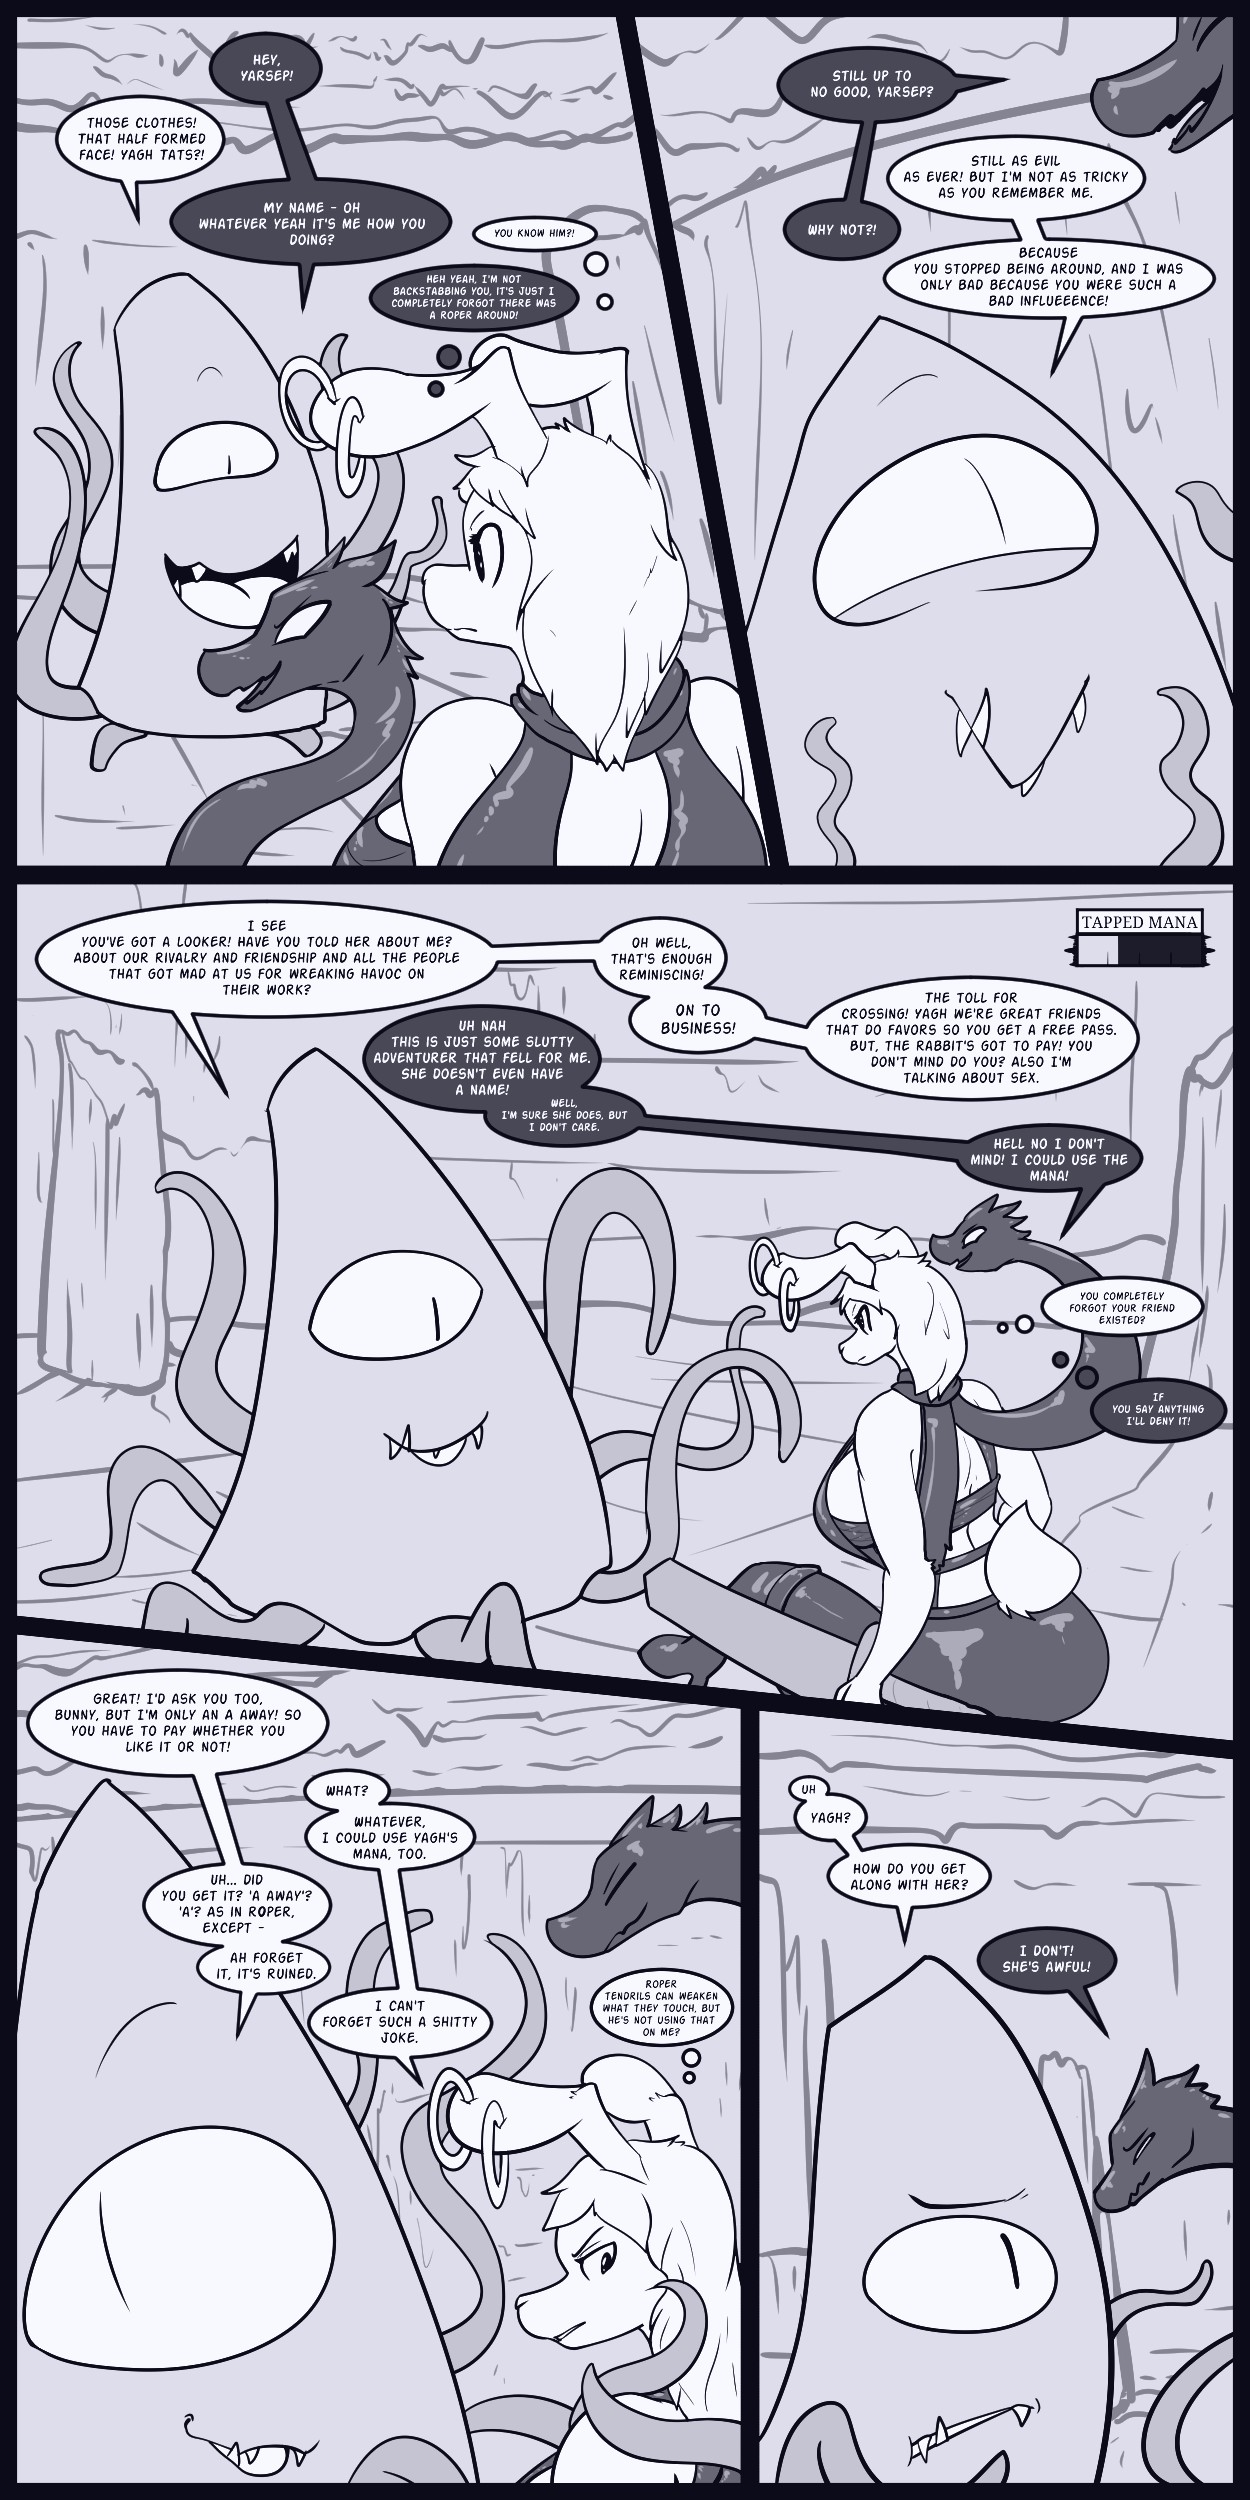 Rough Situation 2 page 05